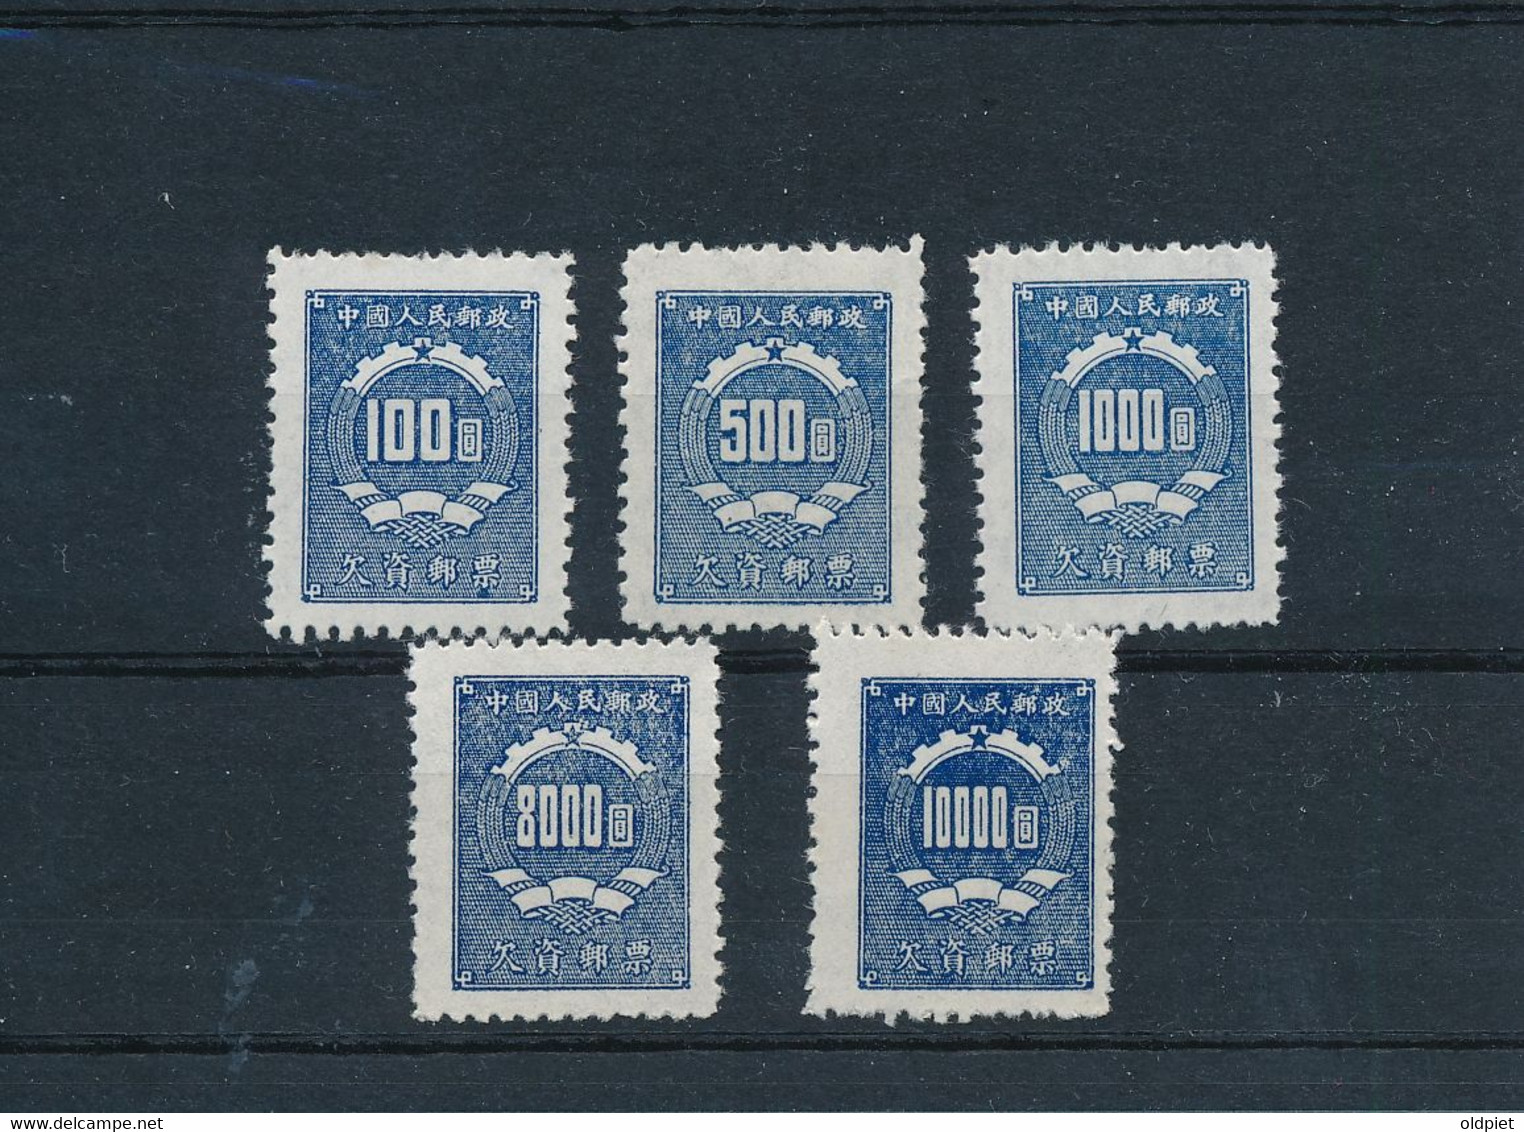 P.R. CHINA Postage Due Stamps Portomarken 1950 - Mi # 1, 3, 5, 8, 9 Mint No Gum (*) Digits In The Coat Of Arms - Portomarken